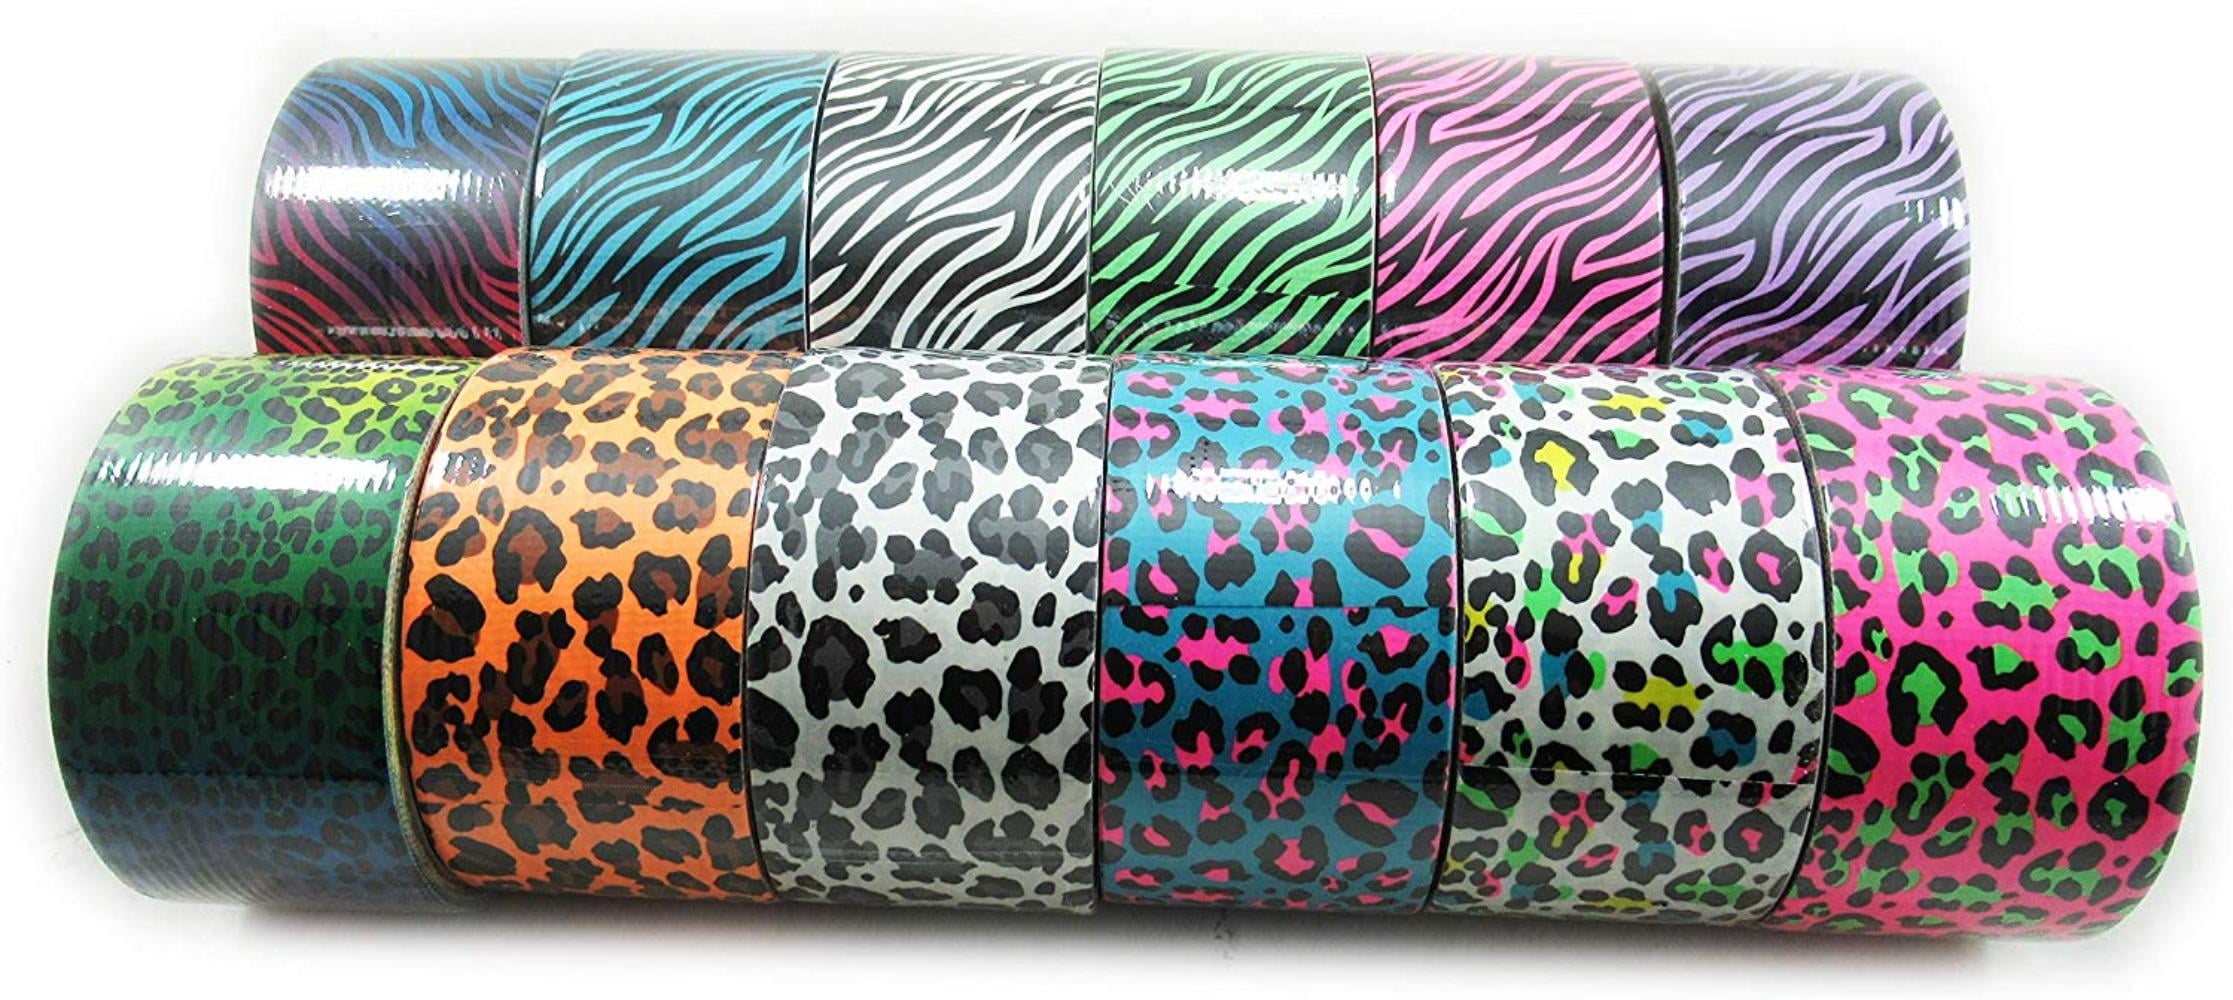 Buy Products Animal Print Duct Tape Collection - 12 Rolls Safari Print Duct ...